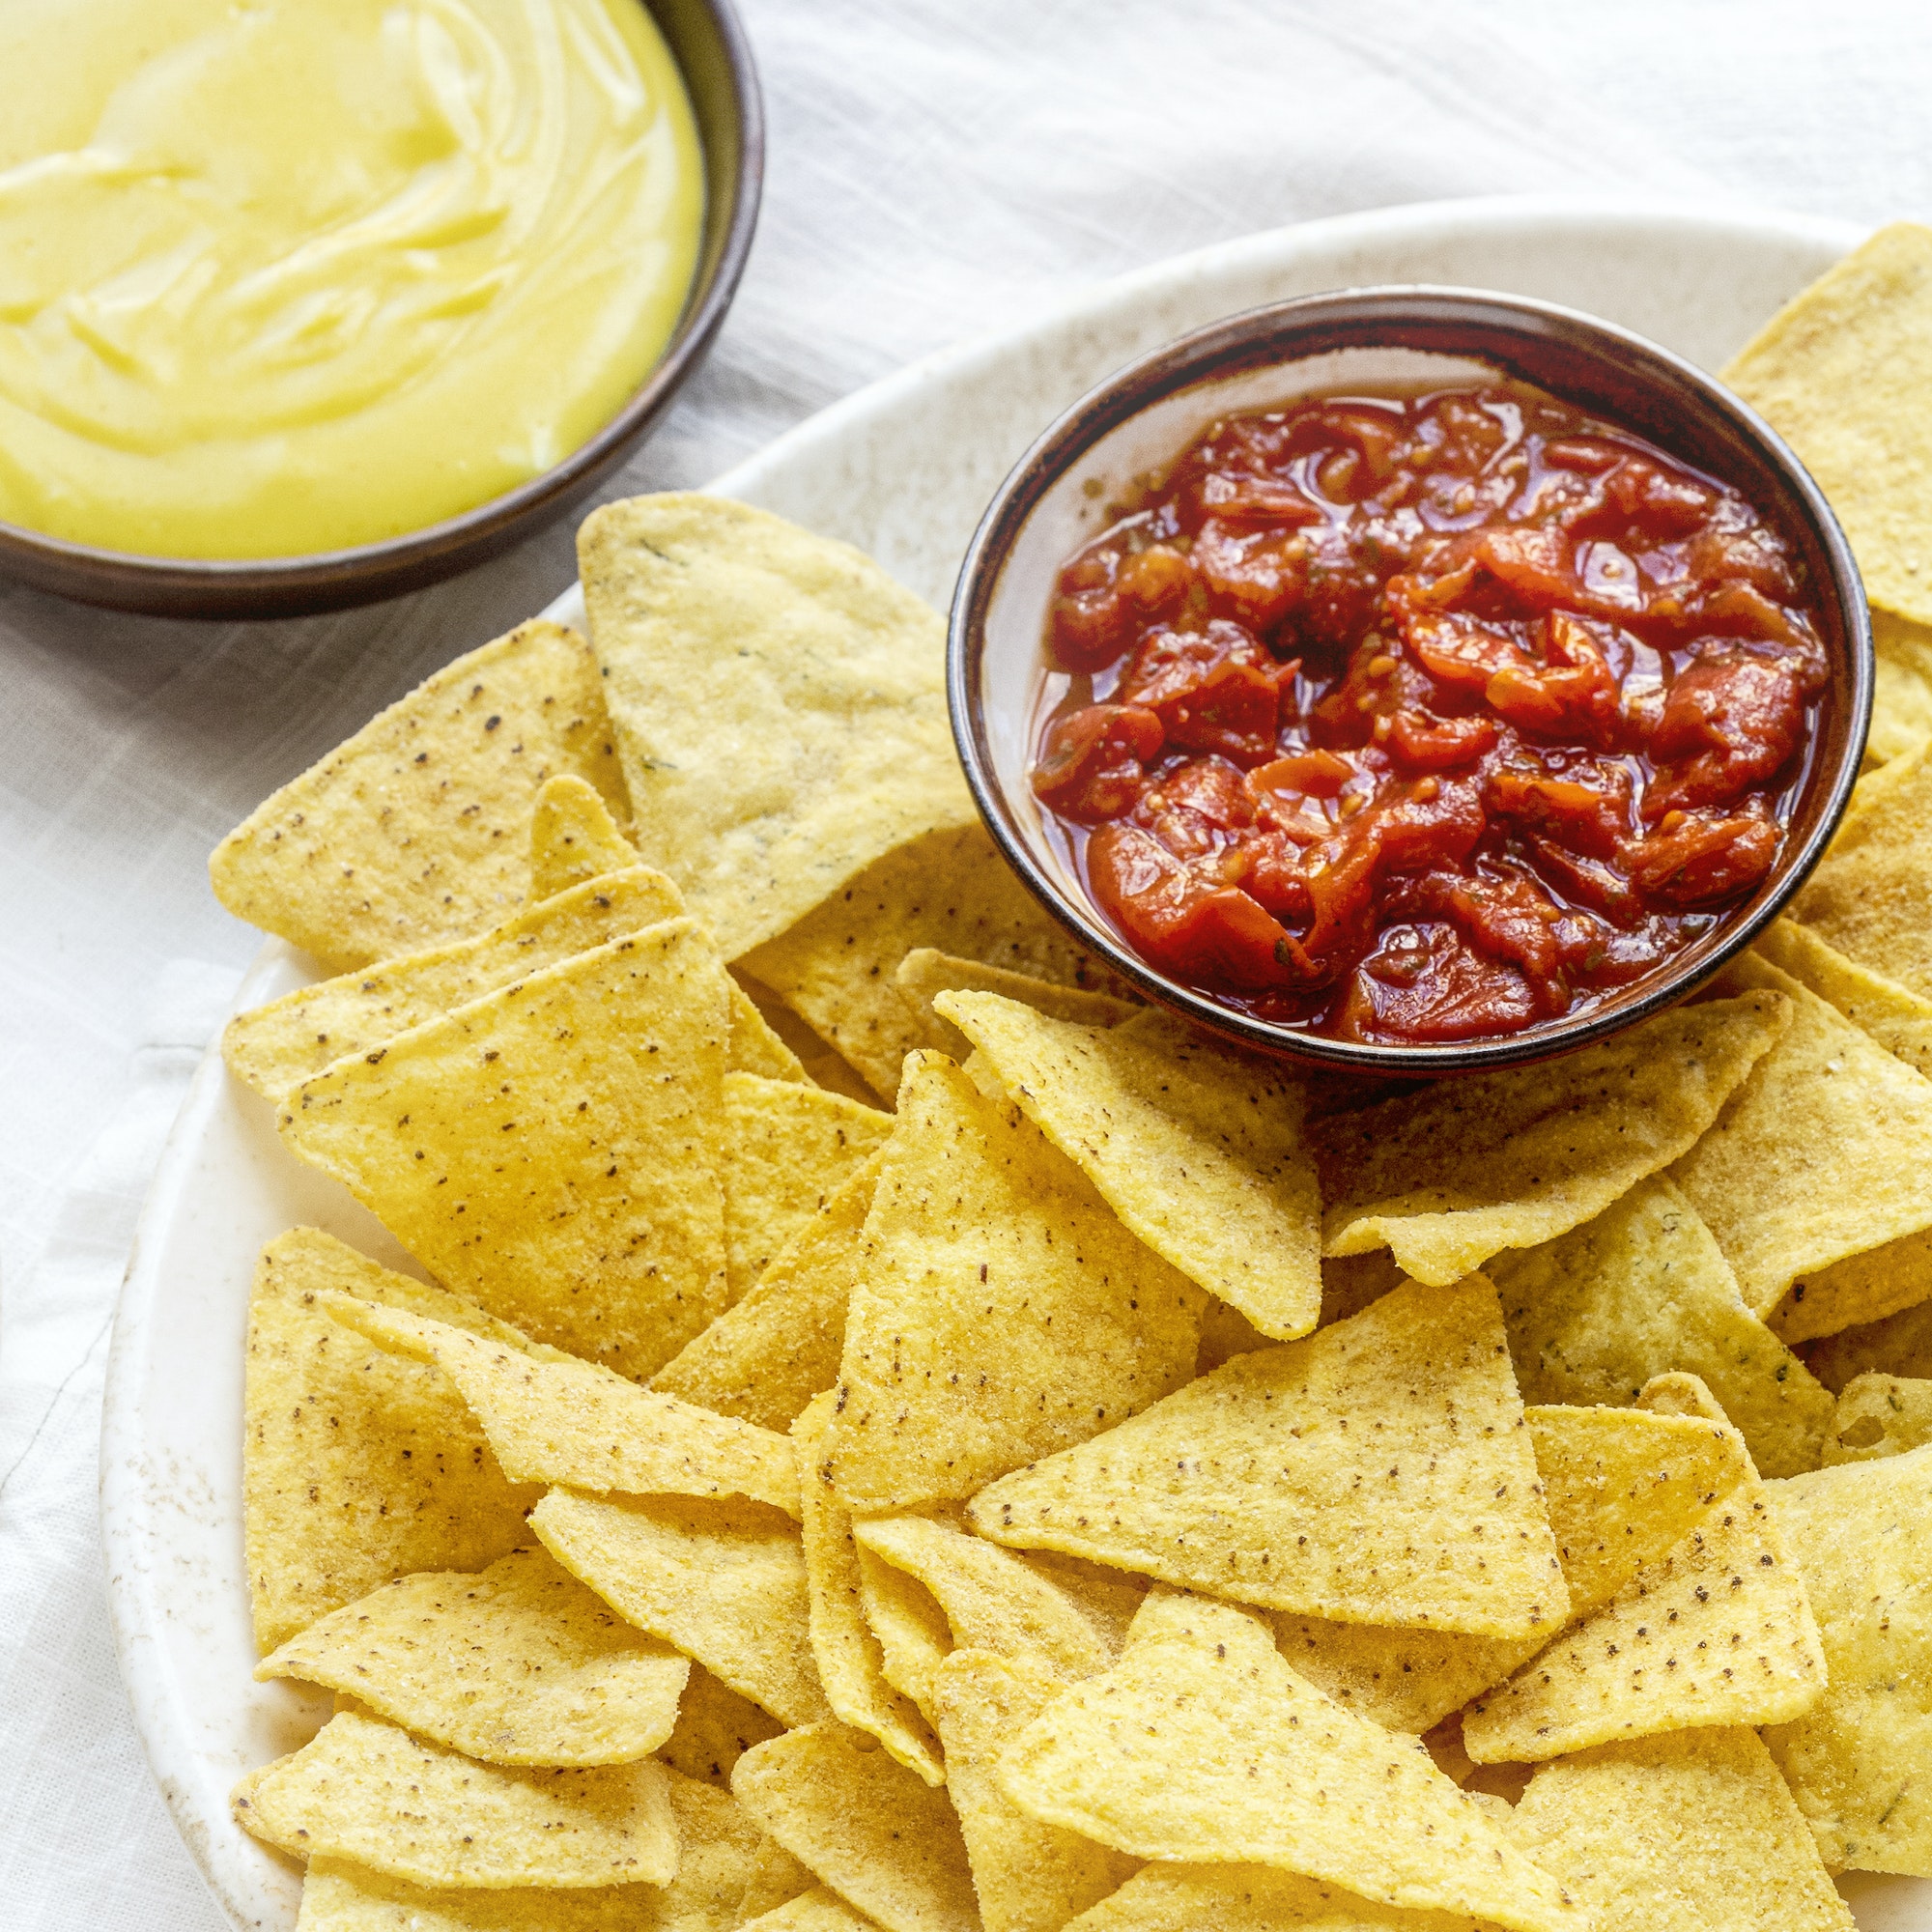 Tex mex corn tortilla chips with cheddar cheese dip and salsa